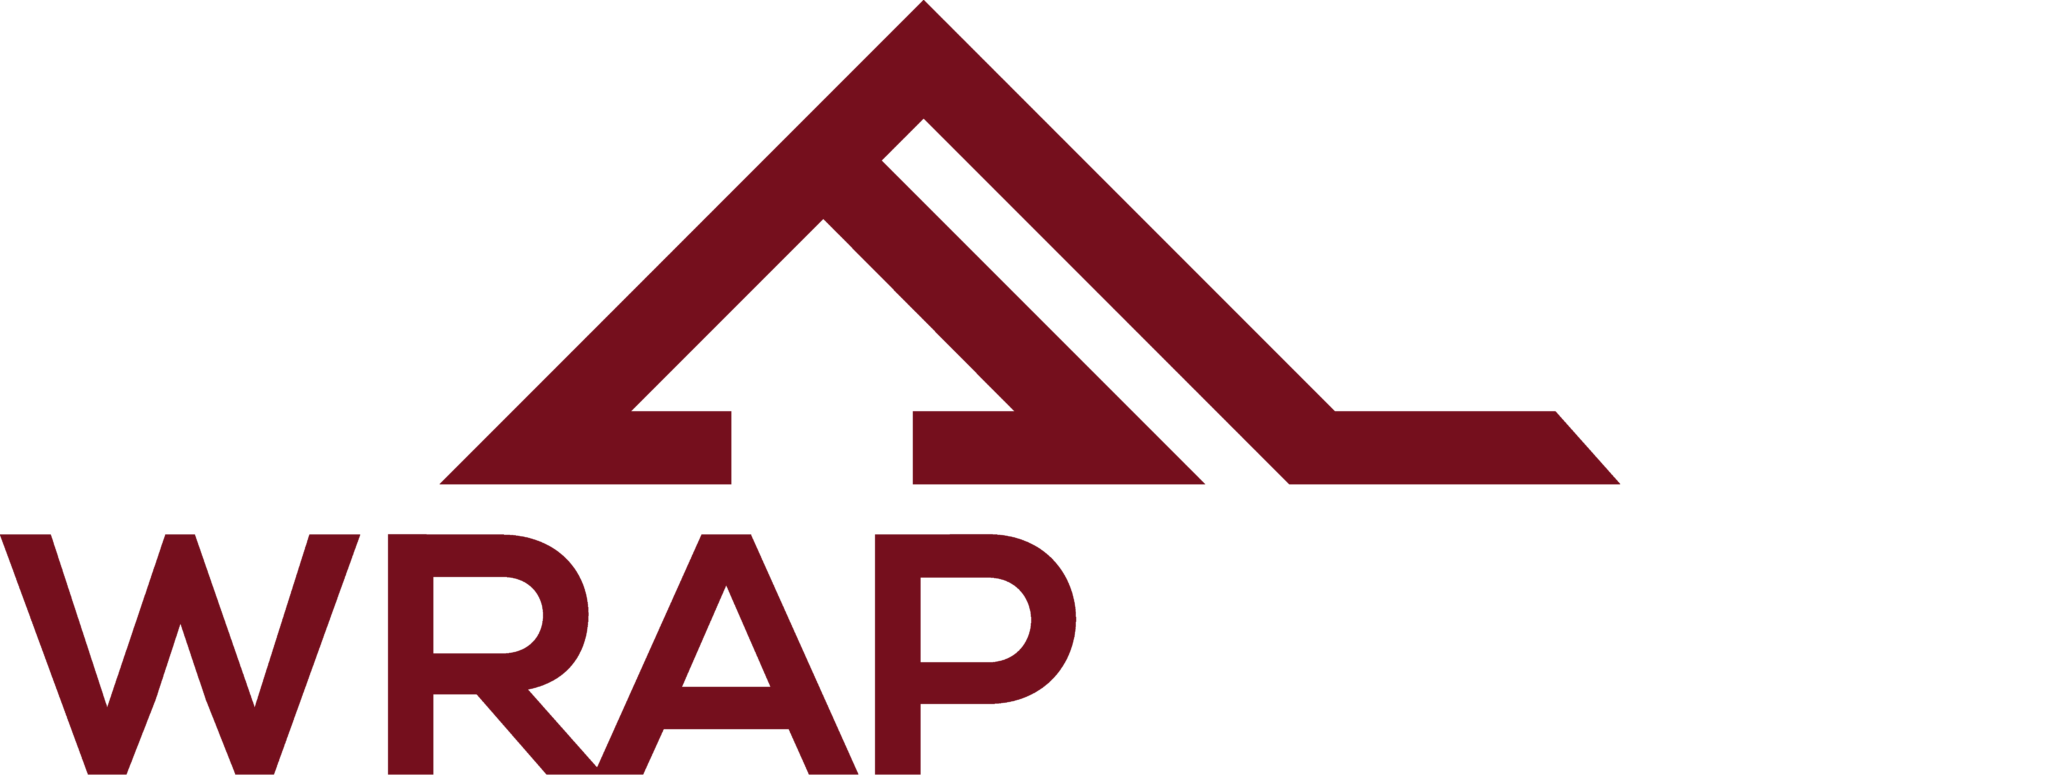 wraproof, all star roofers, roofing installation, roofers, roofing contractors, temporary roof